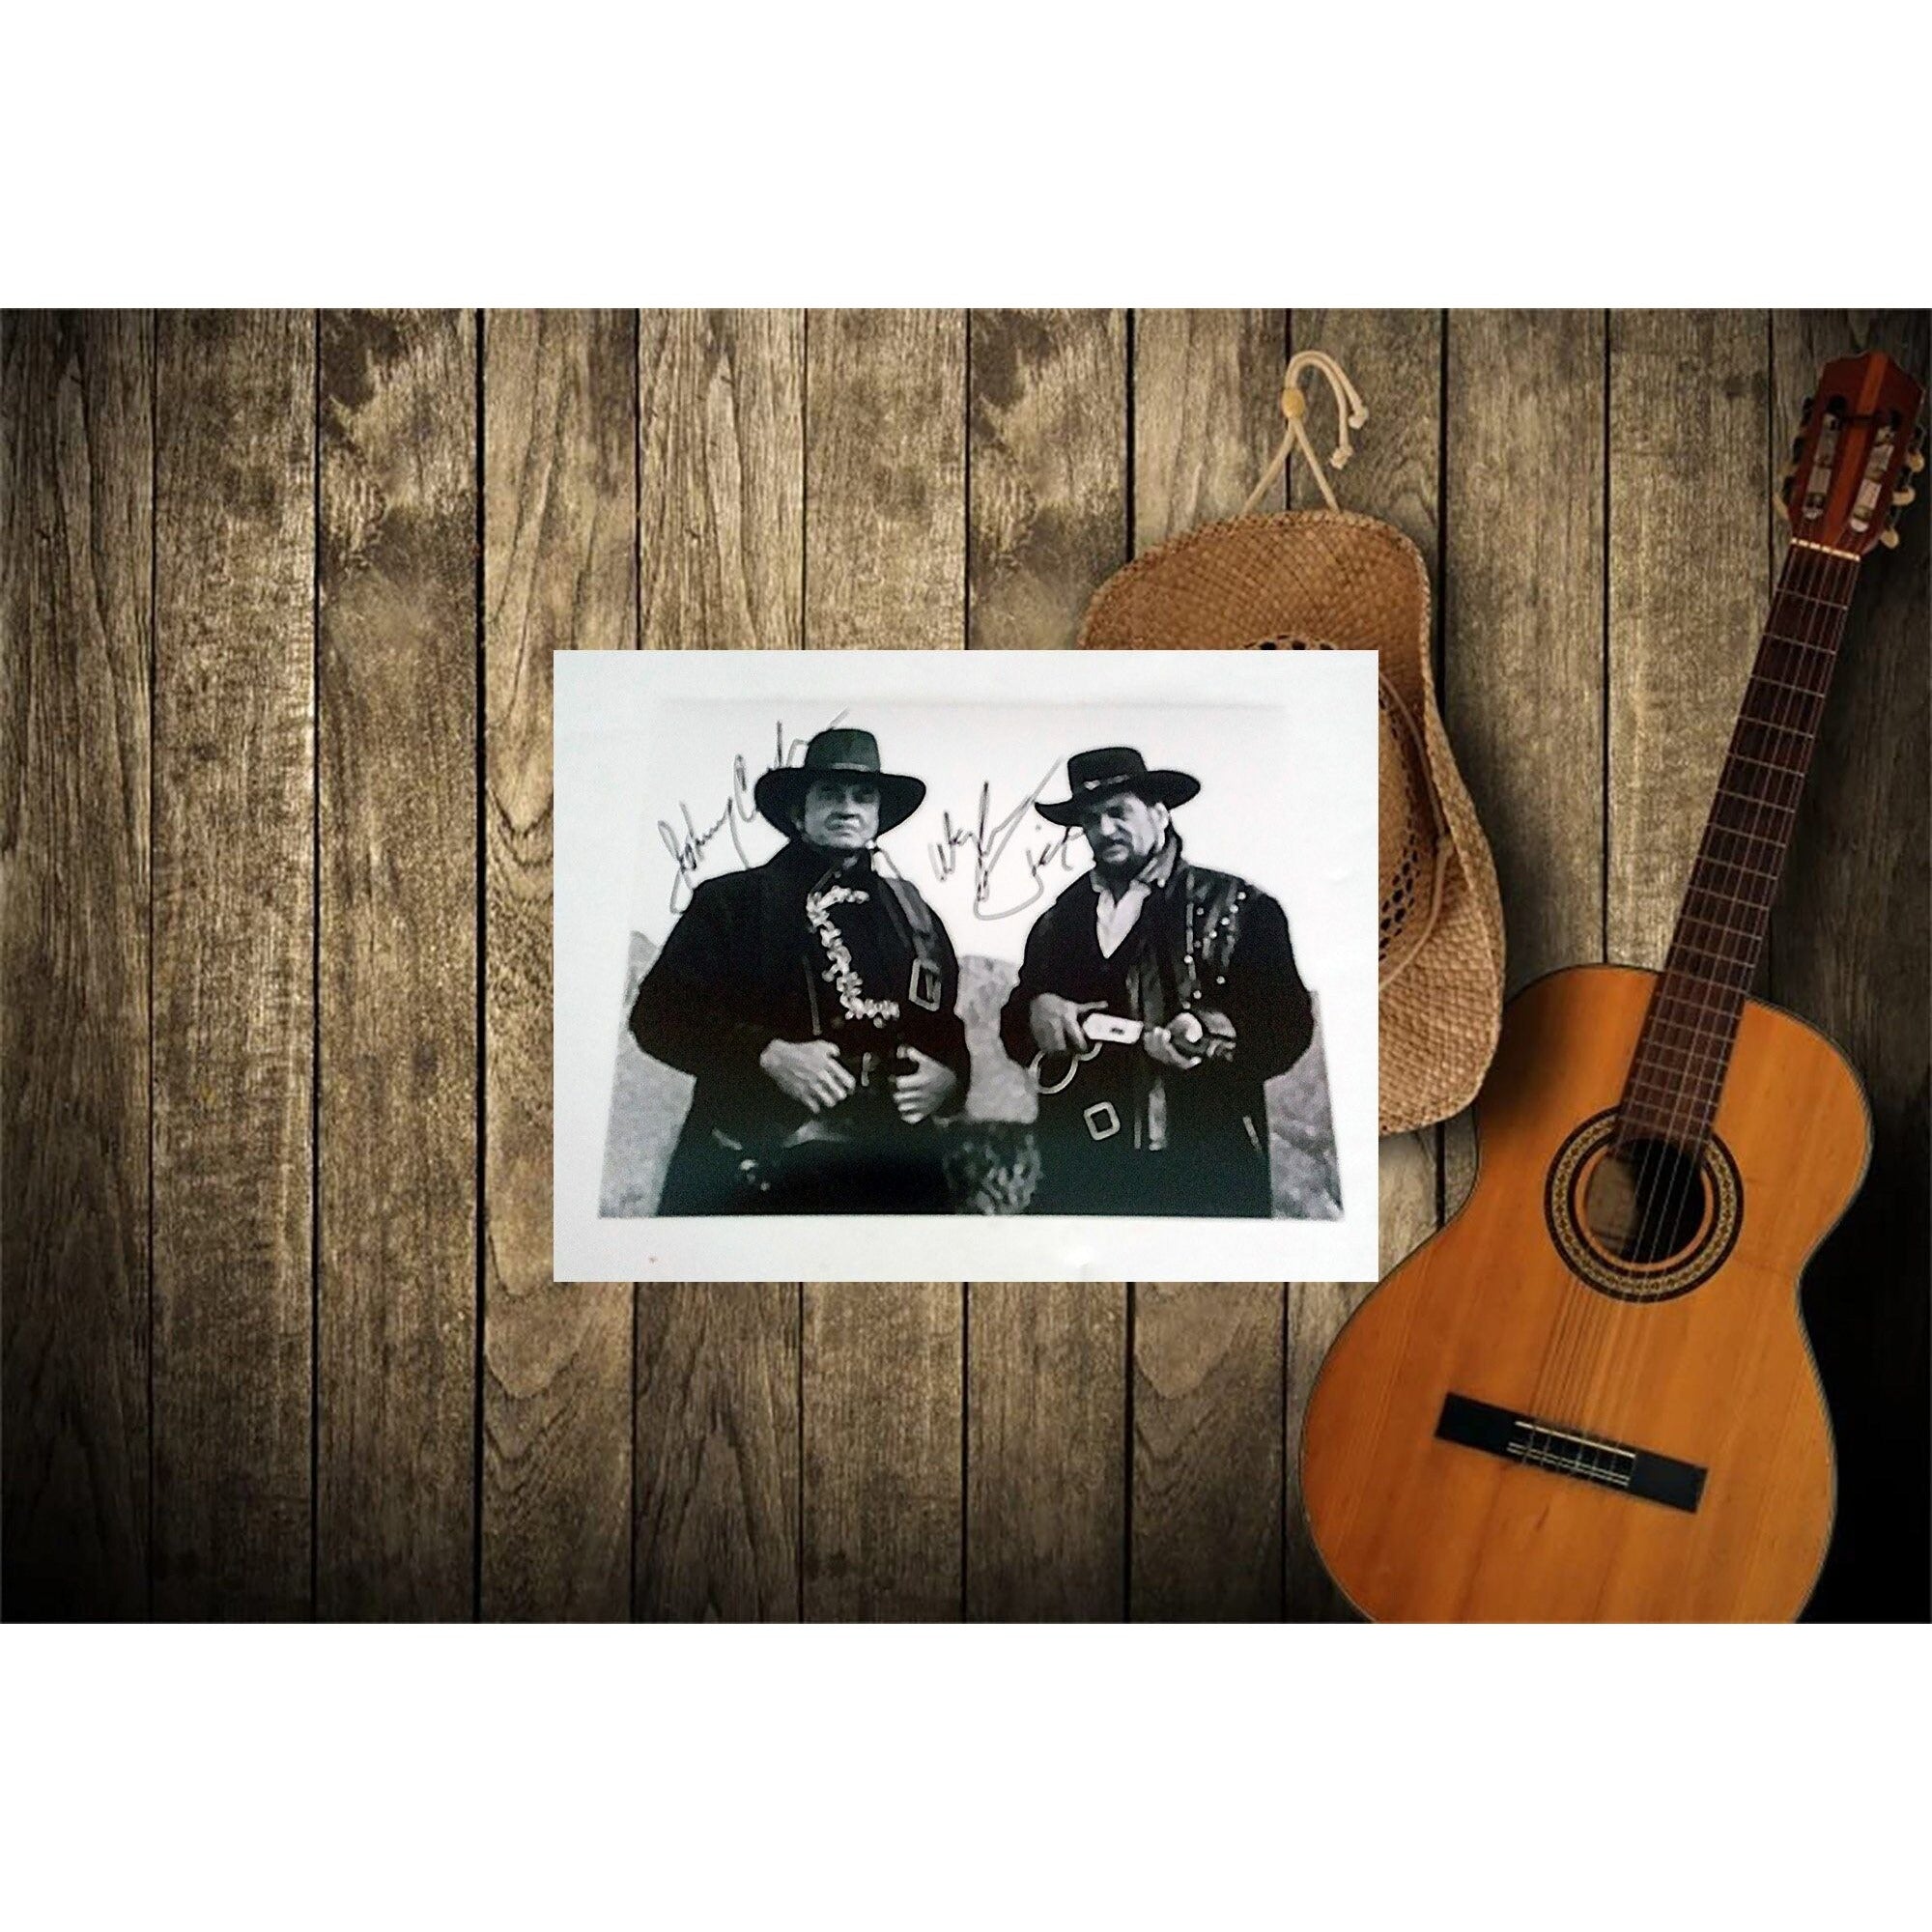 Waylon Jennings and Johnny Cash 8 by 10 signed photo with proof